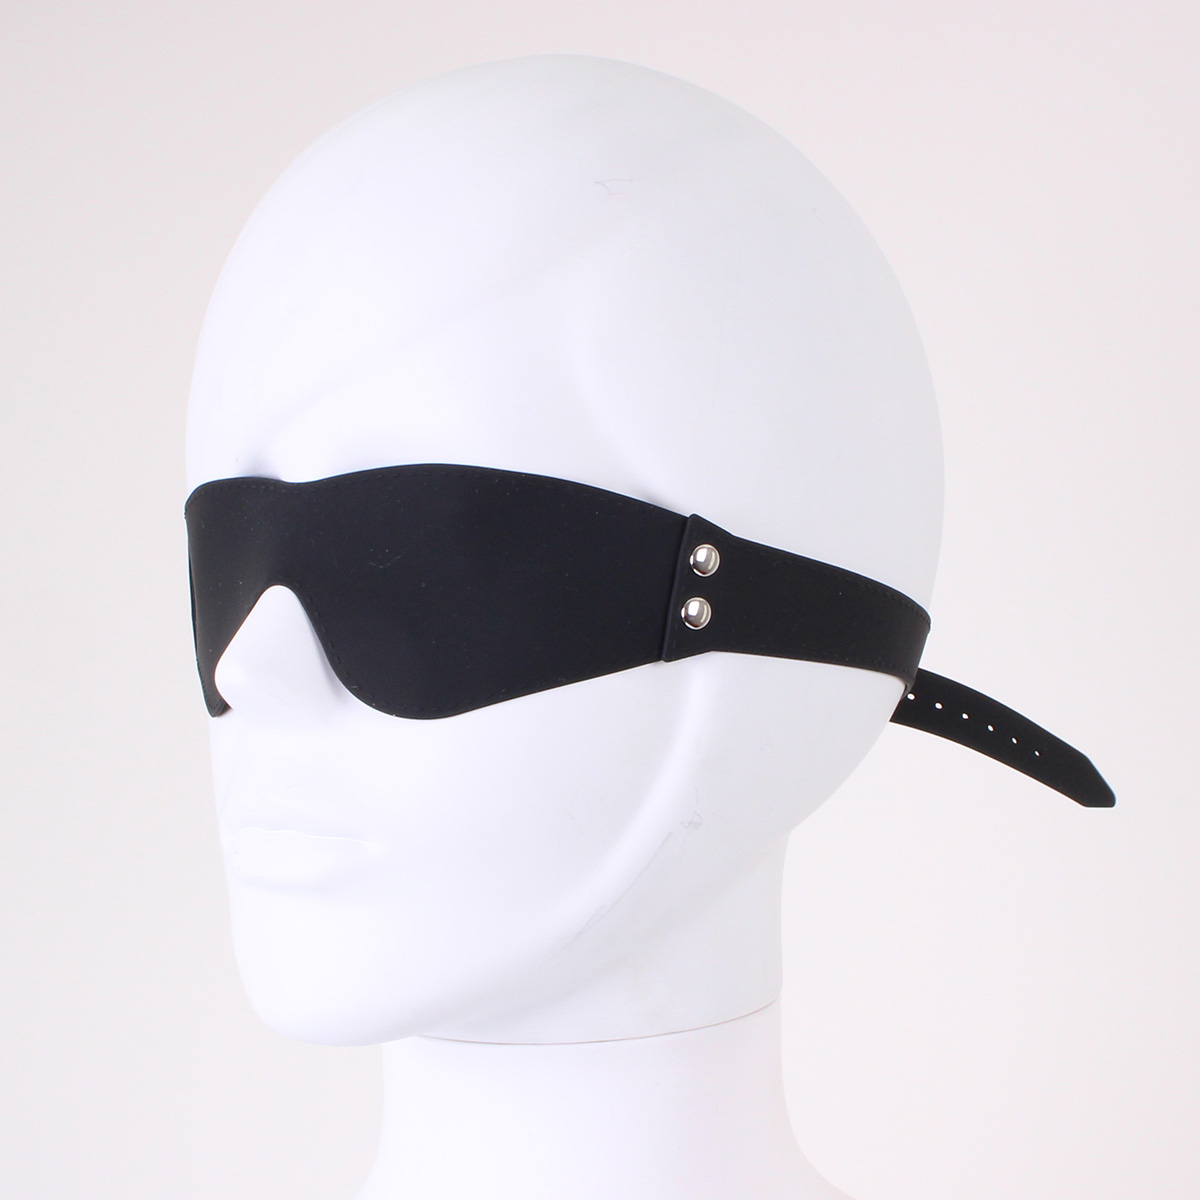 Silicone-Blindfold-OPR-2050035-1